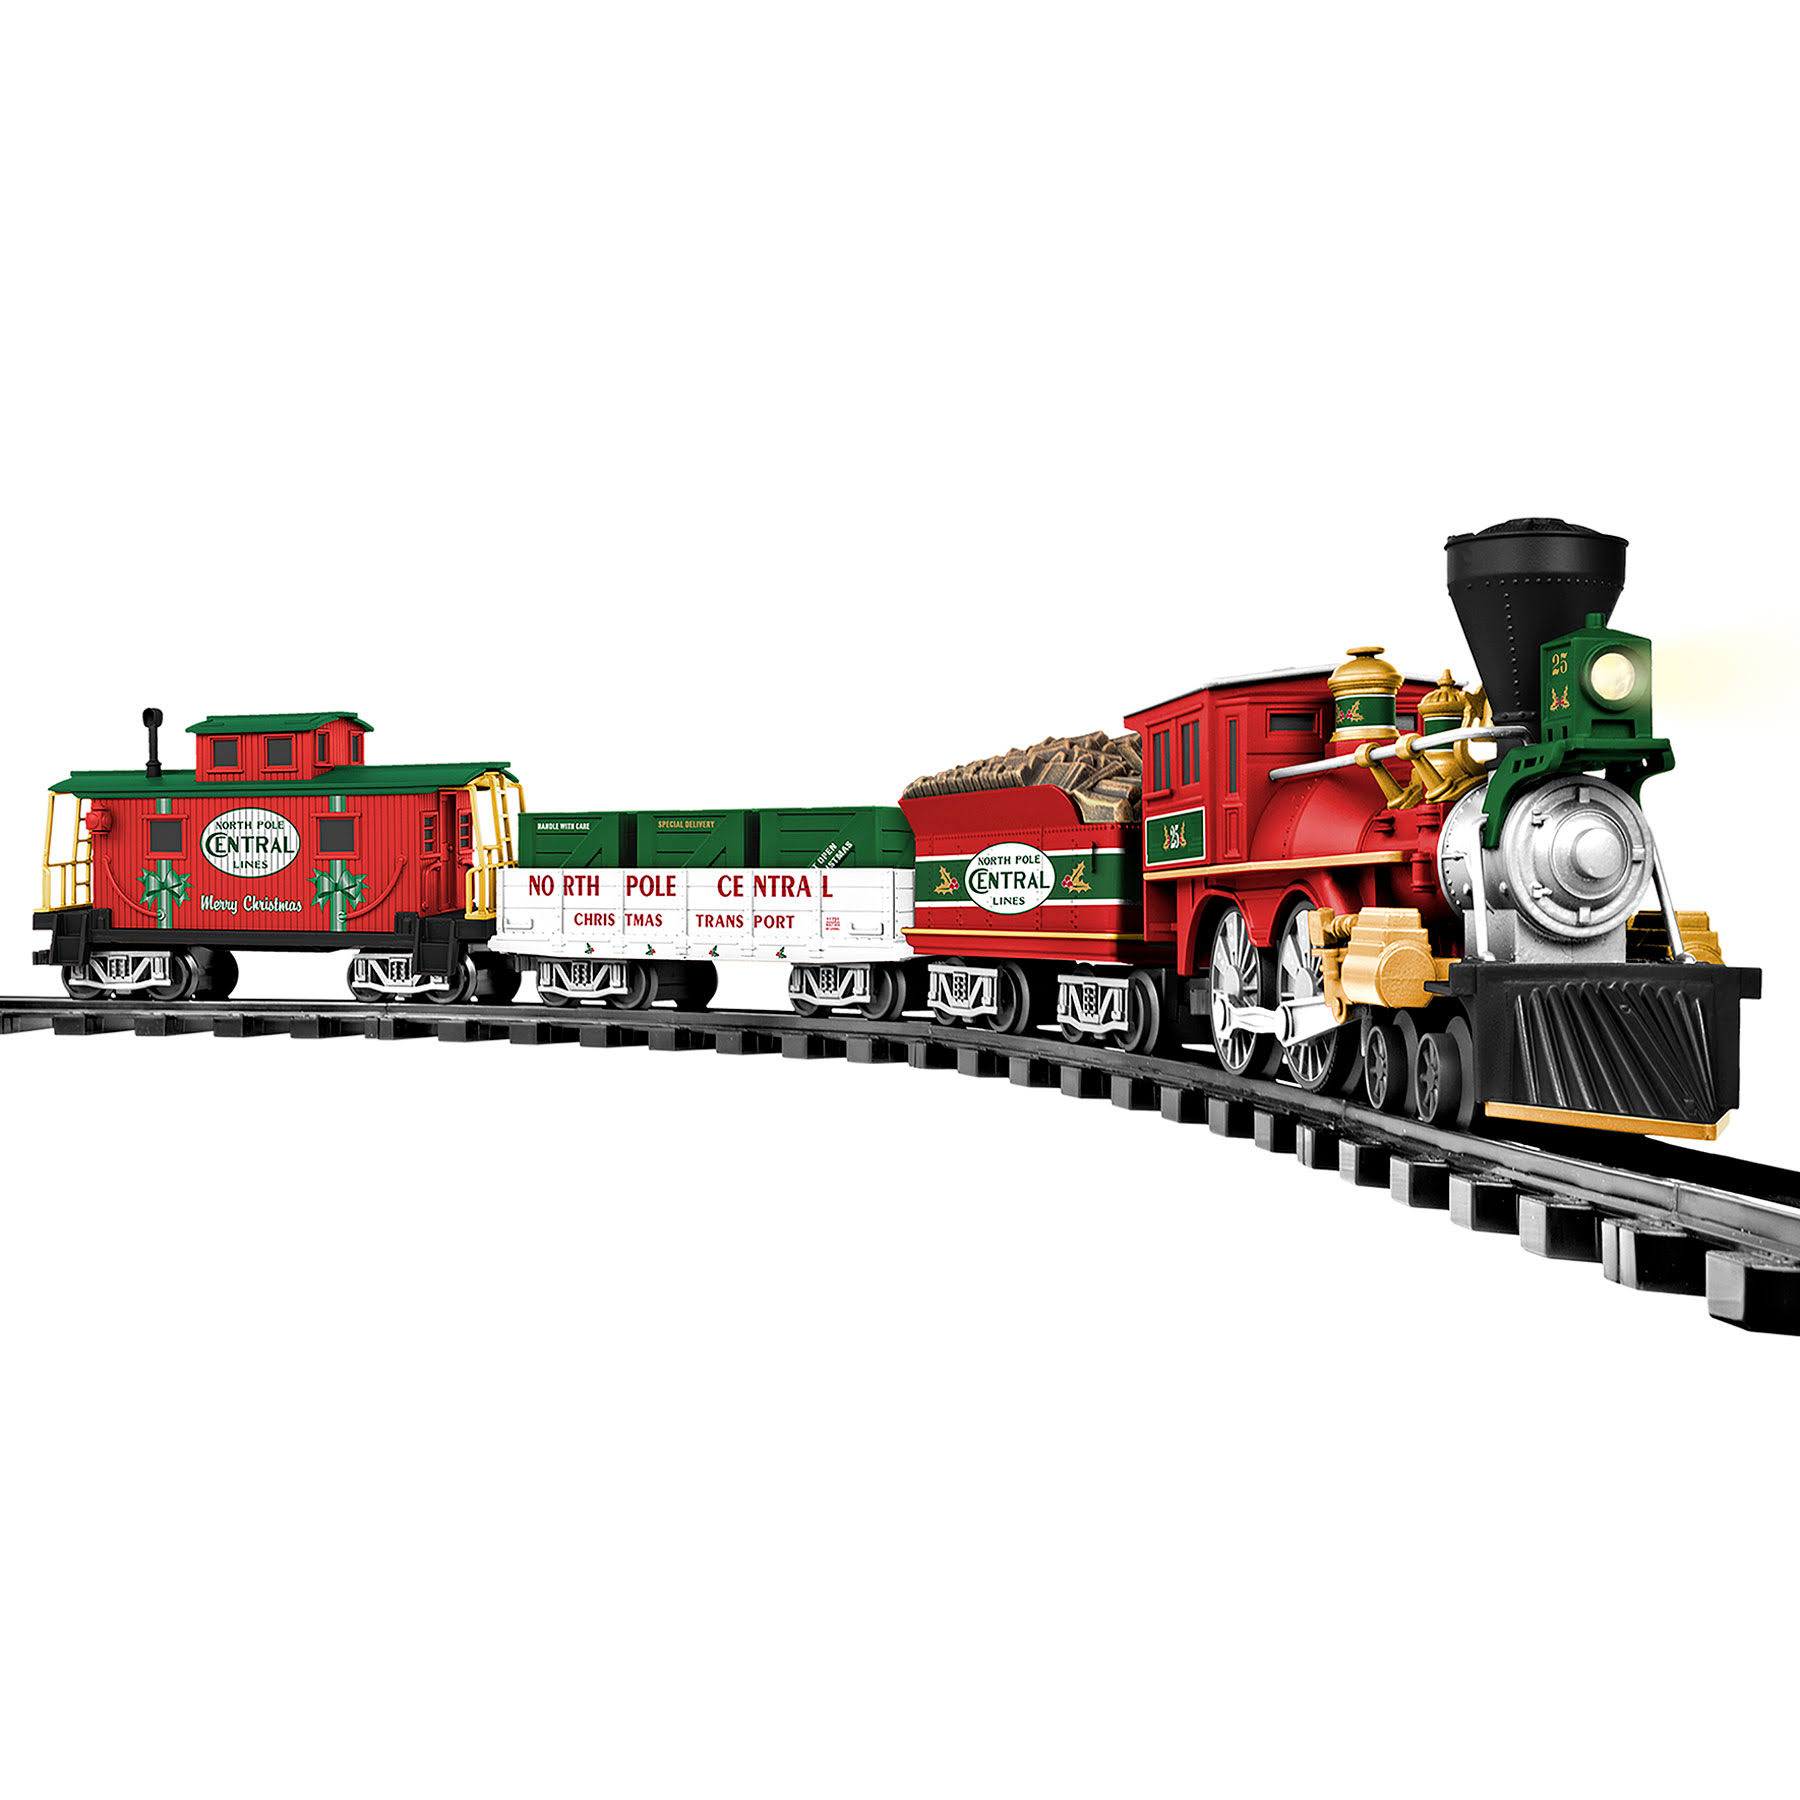 Lionel North Pole Central Ready to Play Train Set Miniature